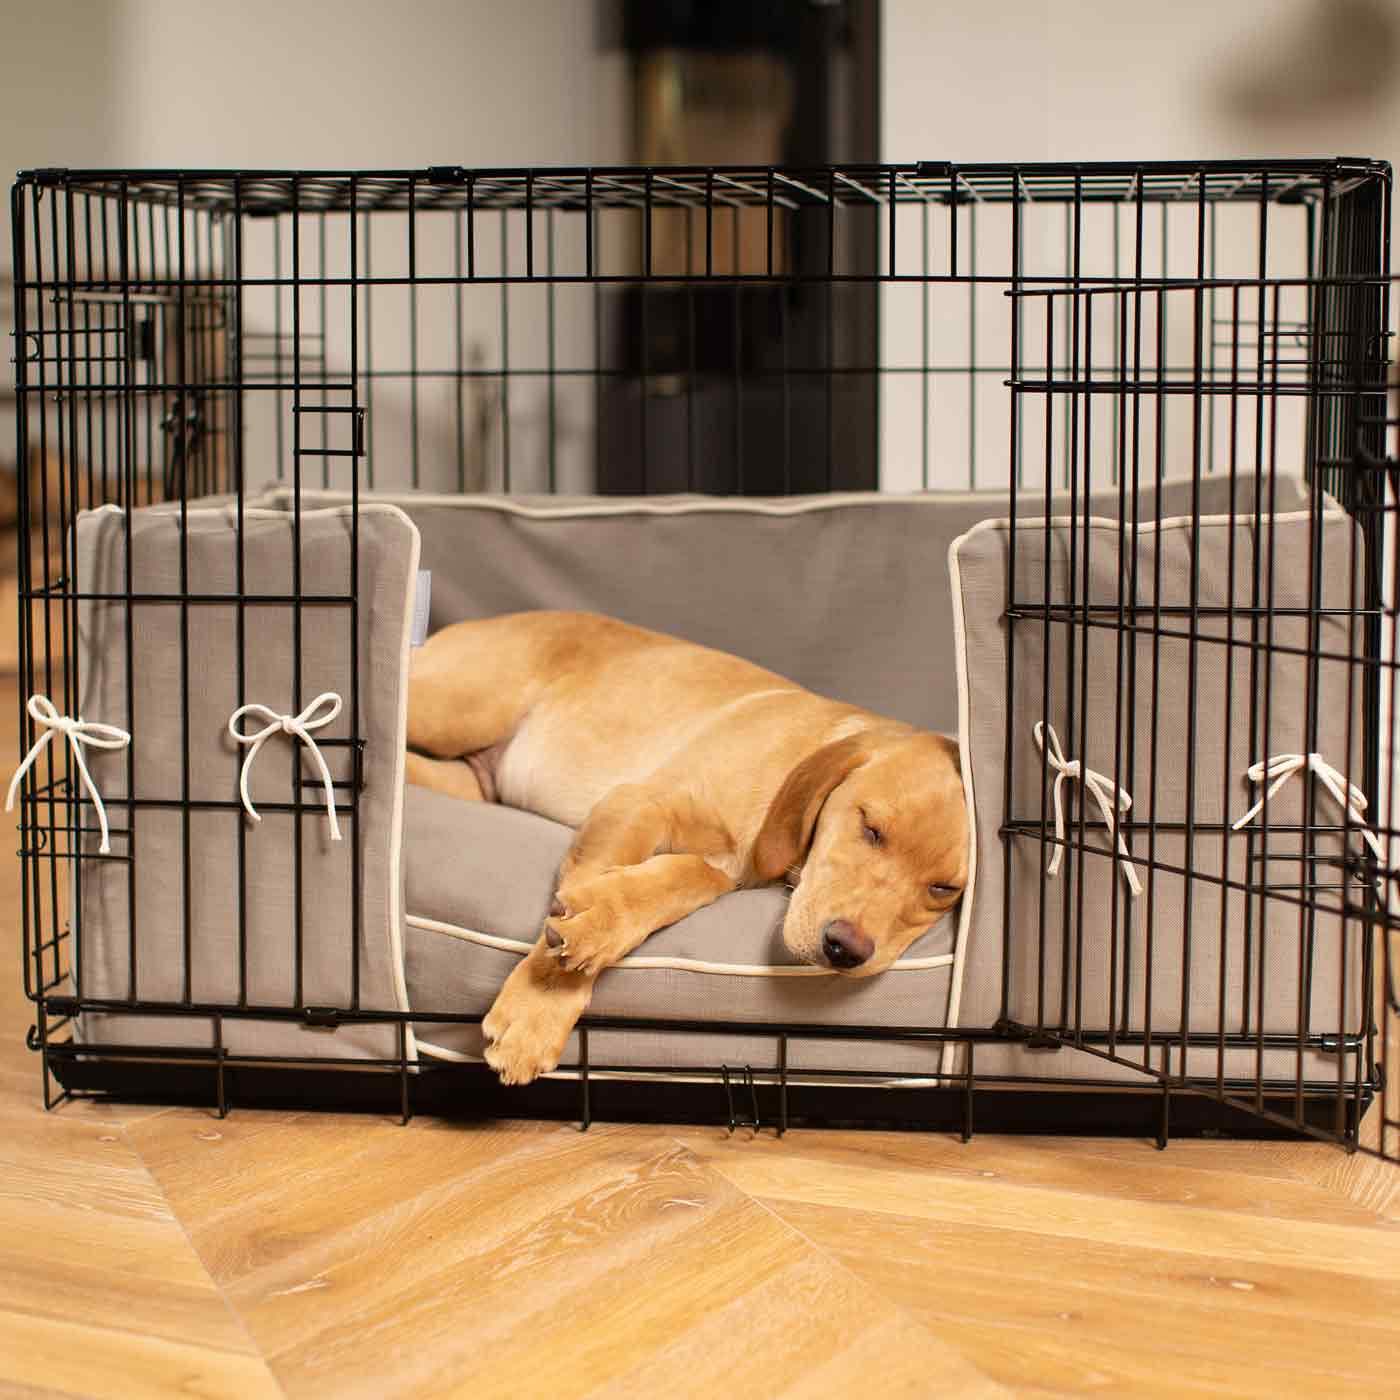 [colour:savanna stone] Accessorise your dog crate with our stunning bumper covers, choose from our Savanna collection! Made using luxury fabric for the perfect crate accessory to build the ultimate dog den! Available now in 3 colours and sizes at Lords & Labradors